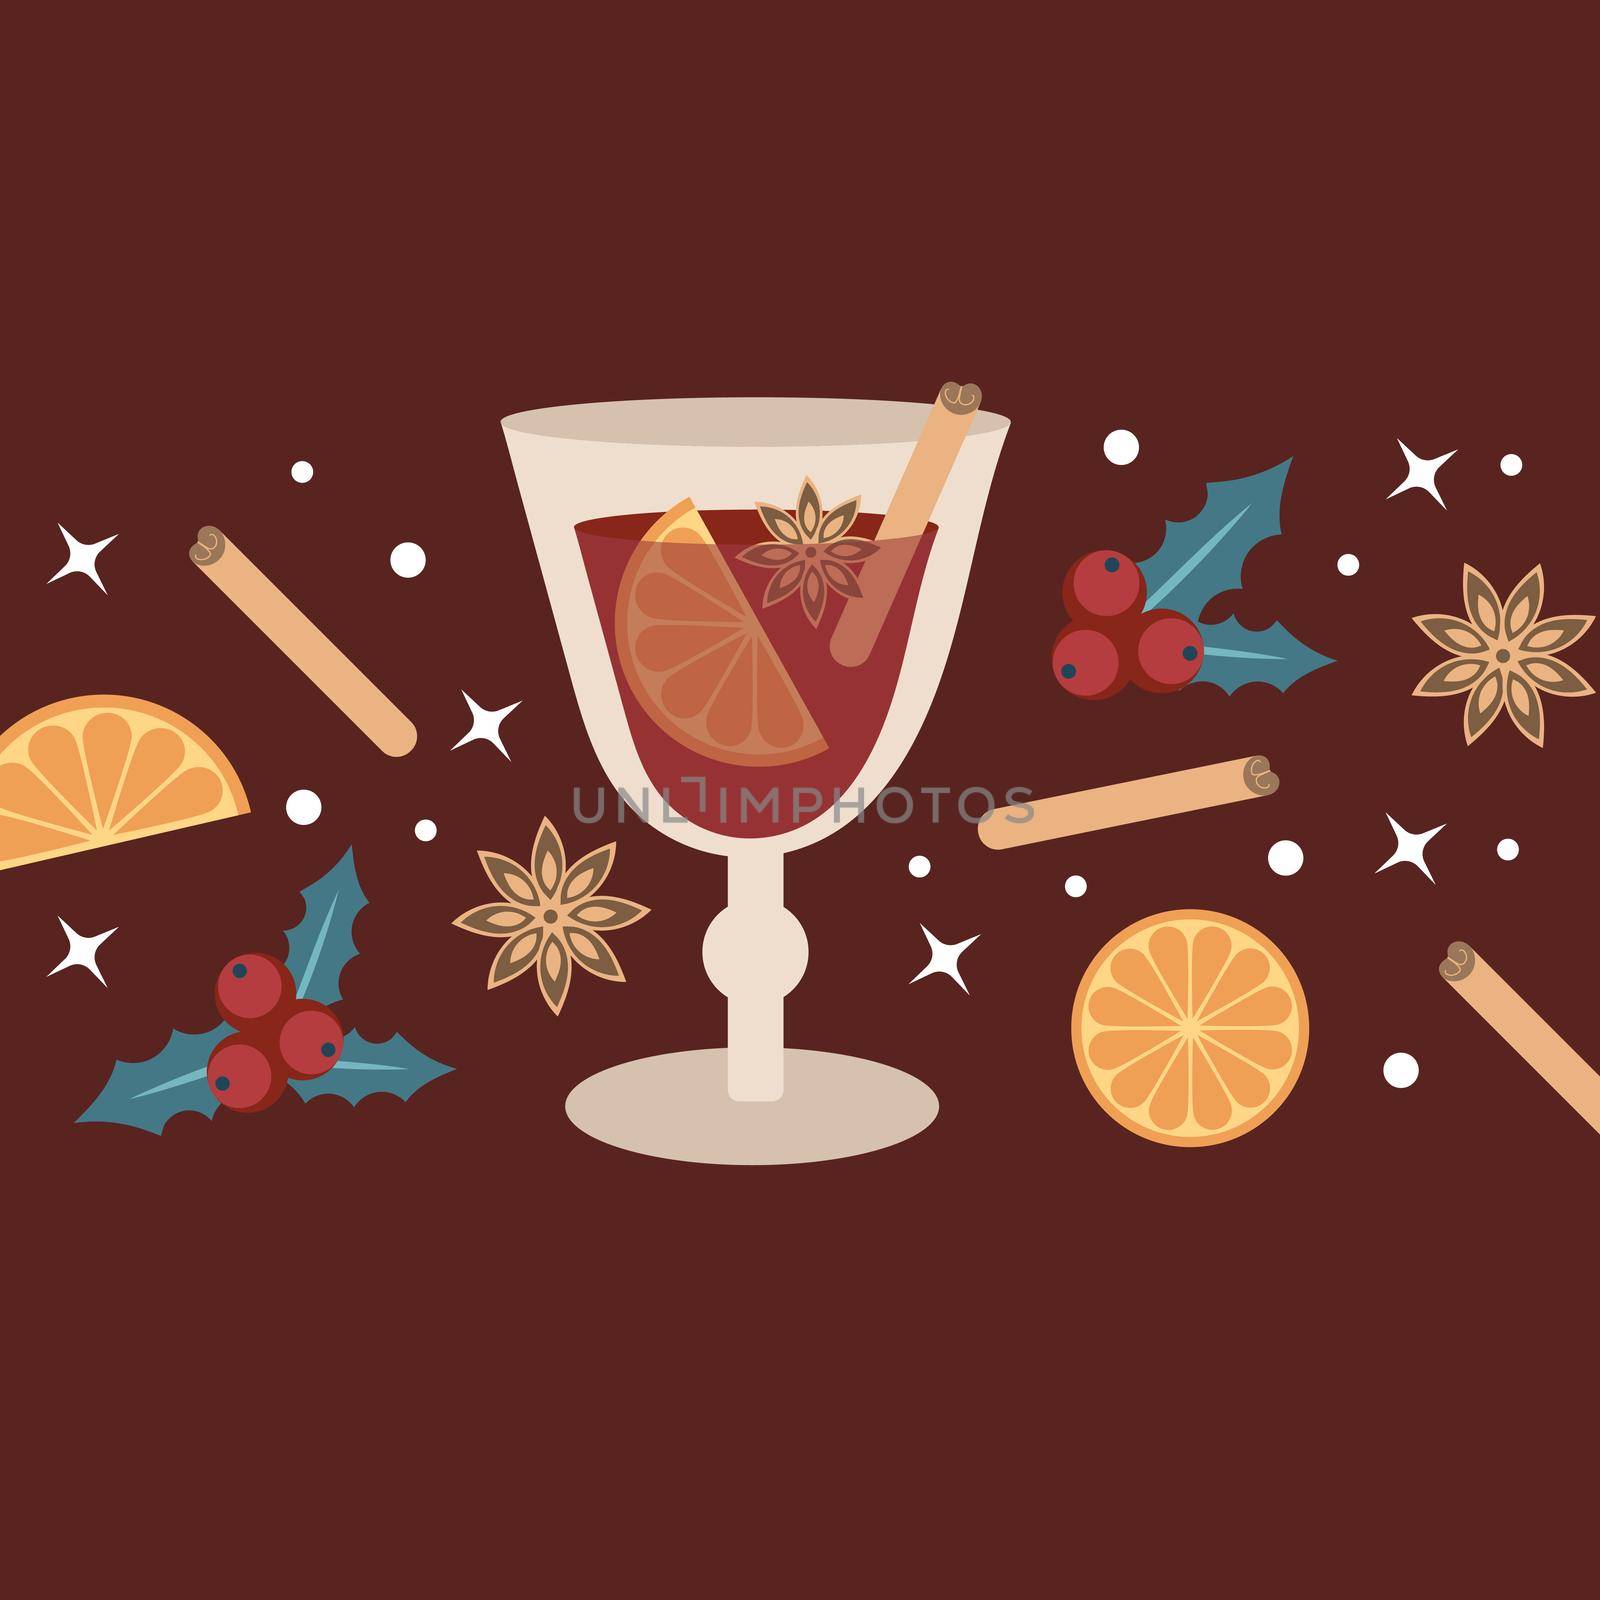 Hot mulled wine in a glass. Elements and spices for a drink on a burgundy background. For the design of winter and autumn street fairs, menus